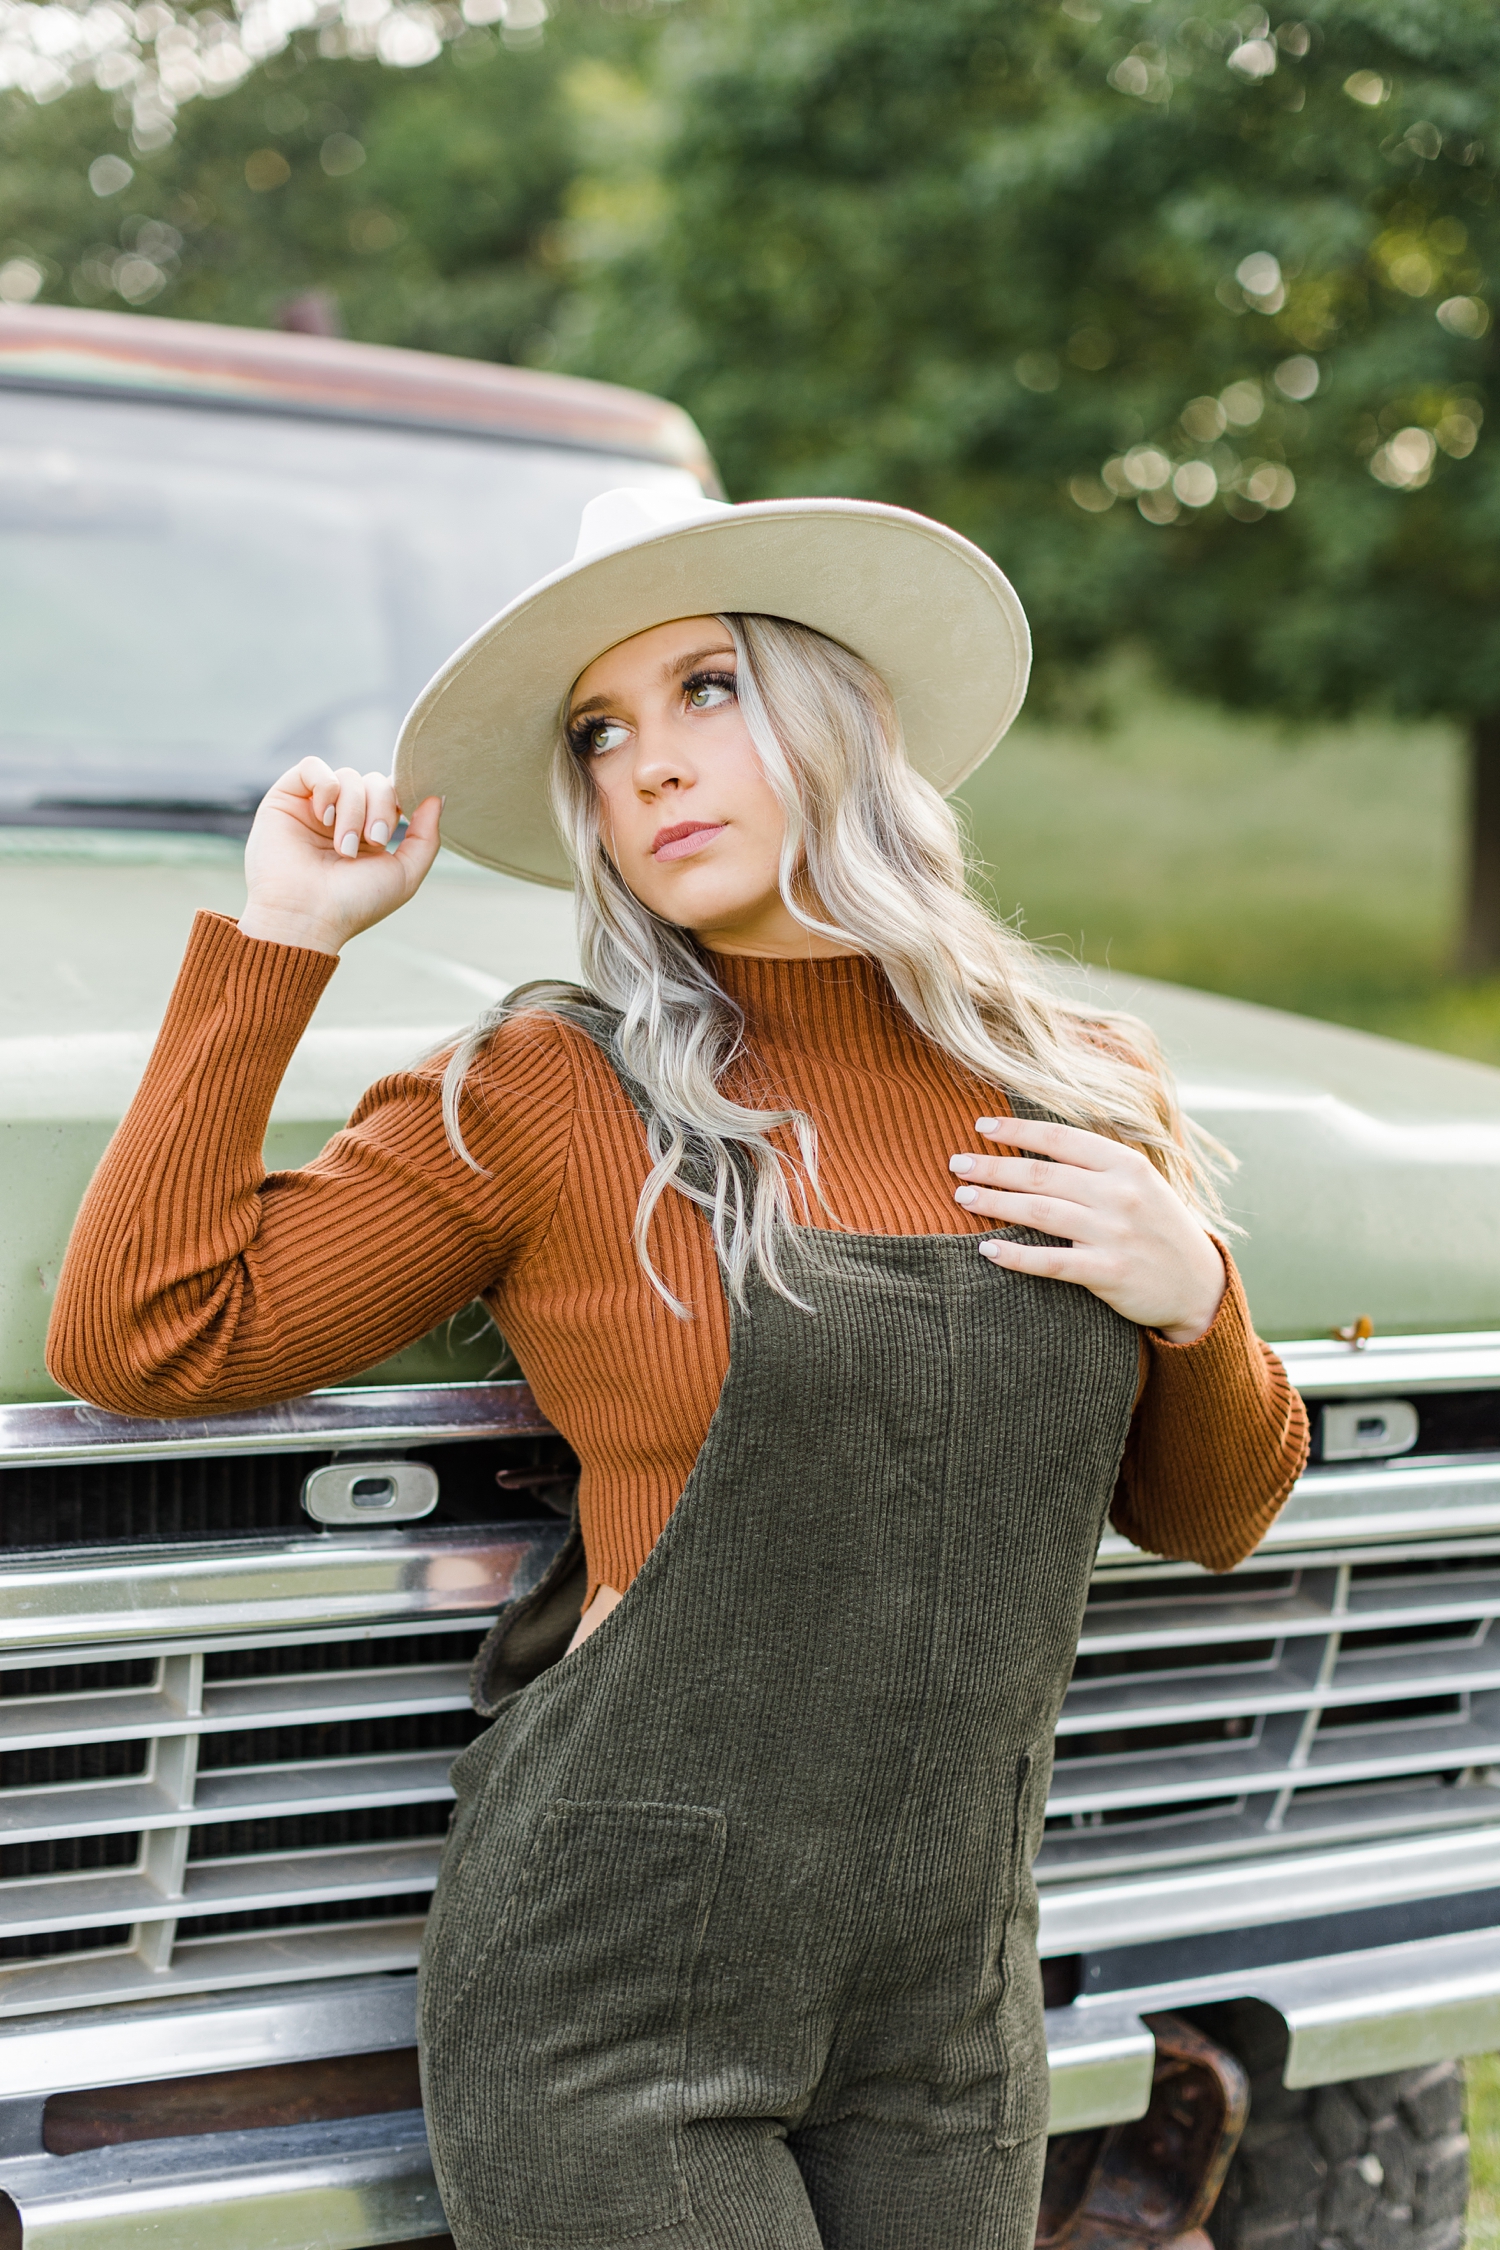 Shelby leans against the front end of a green 72 Ford truck in the middle of a grassy pasture | CB Studio